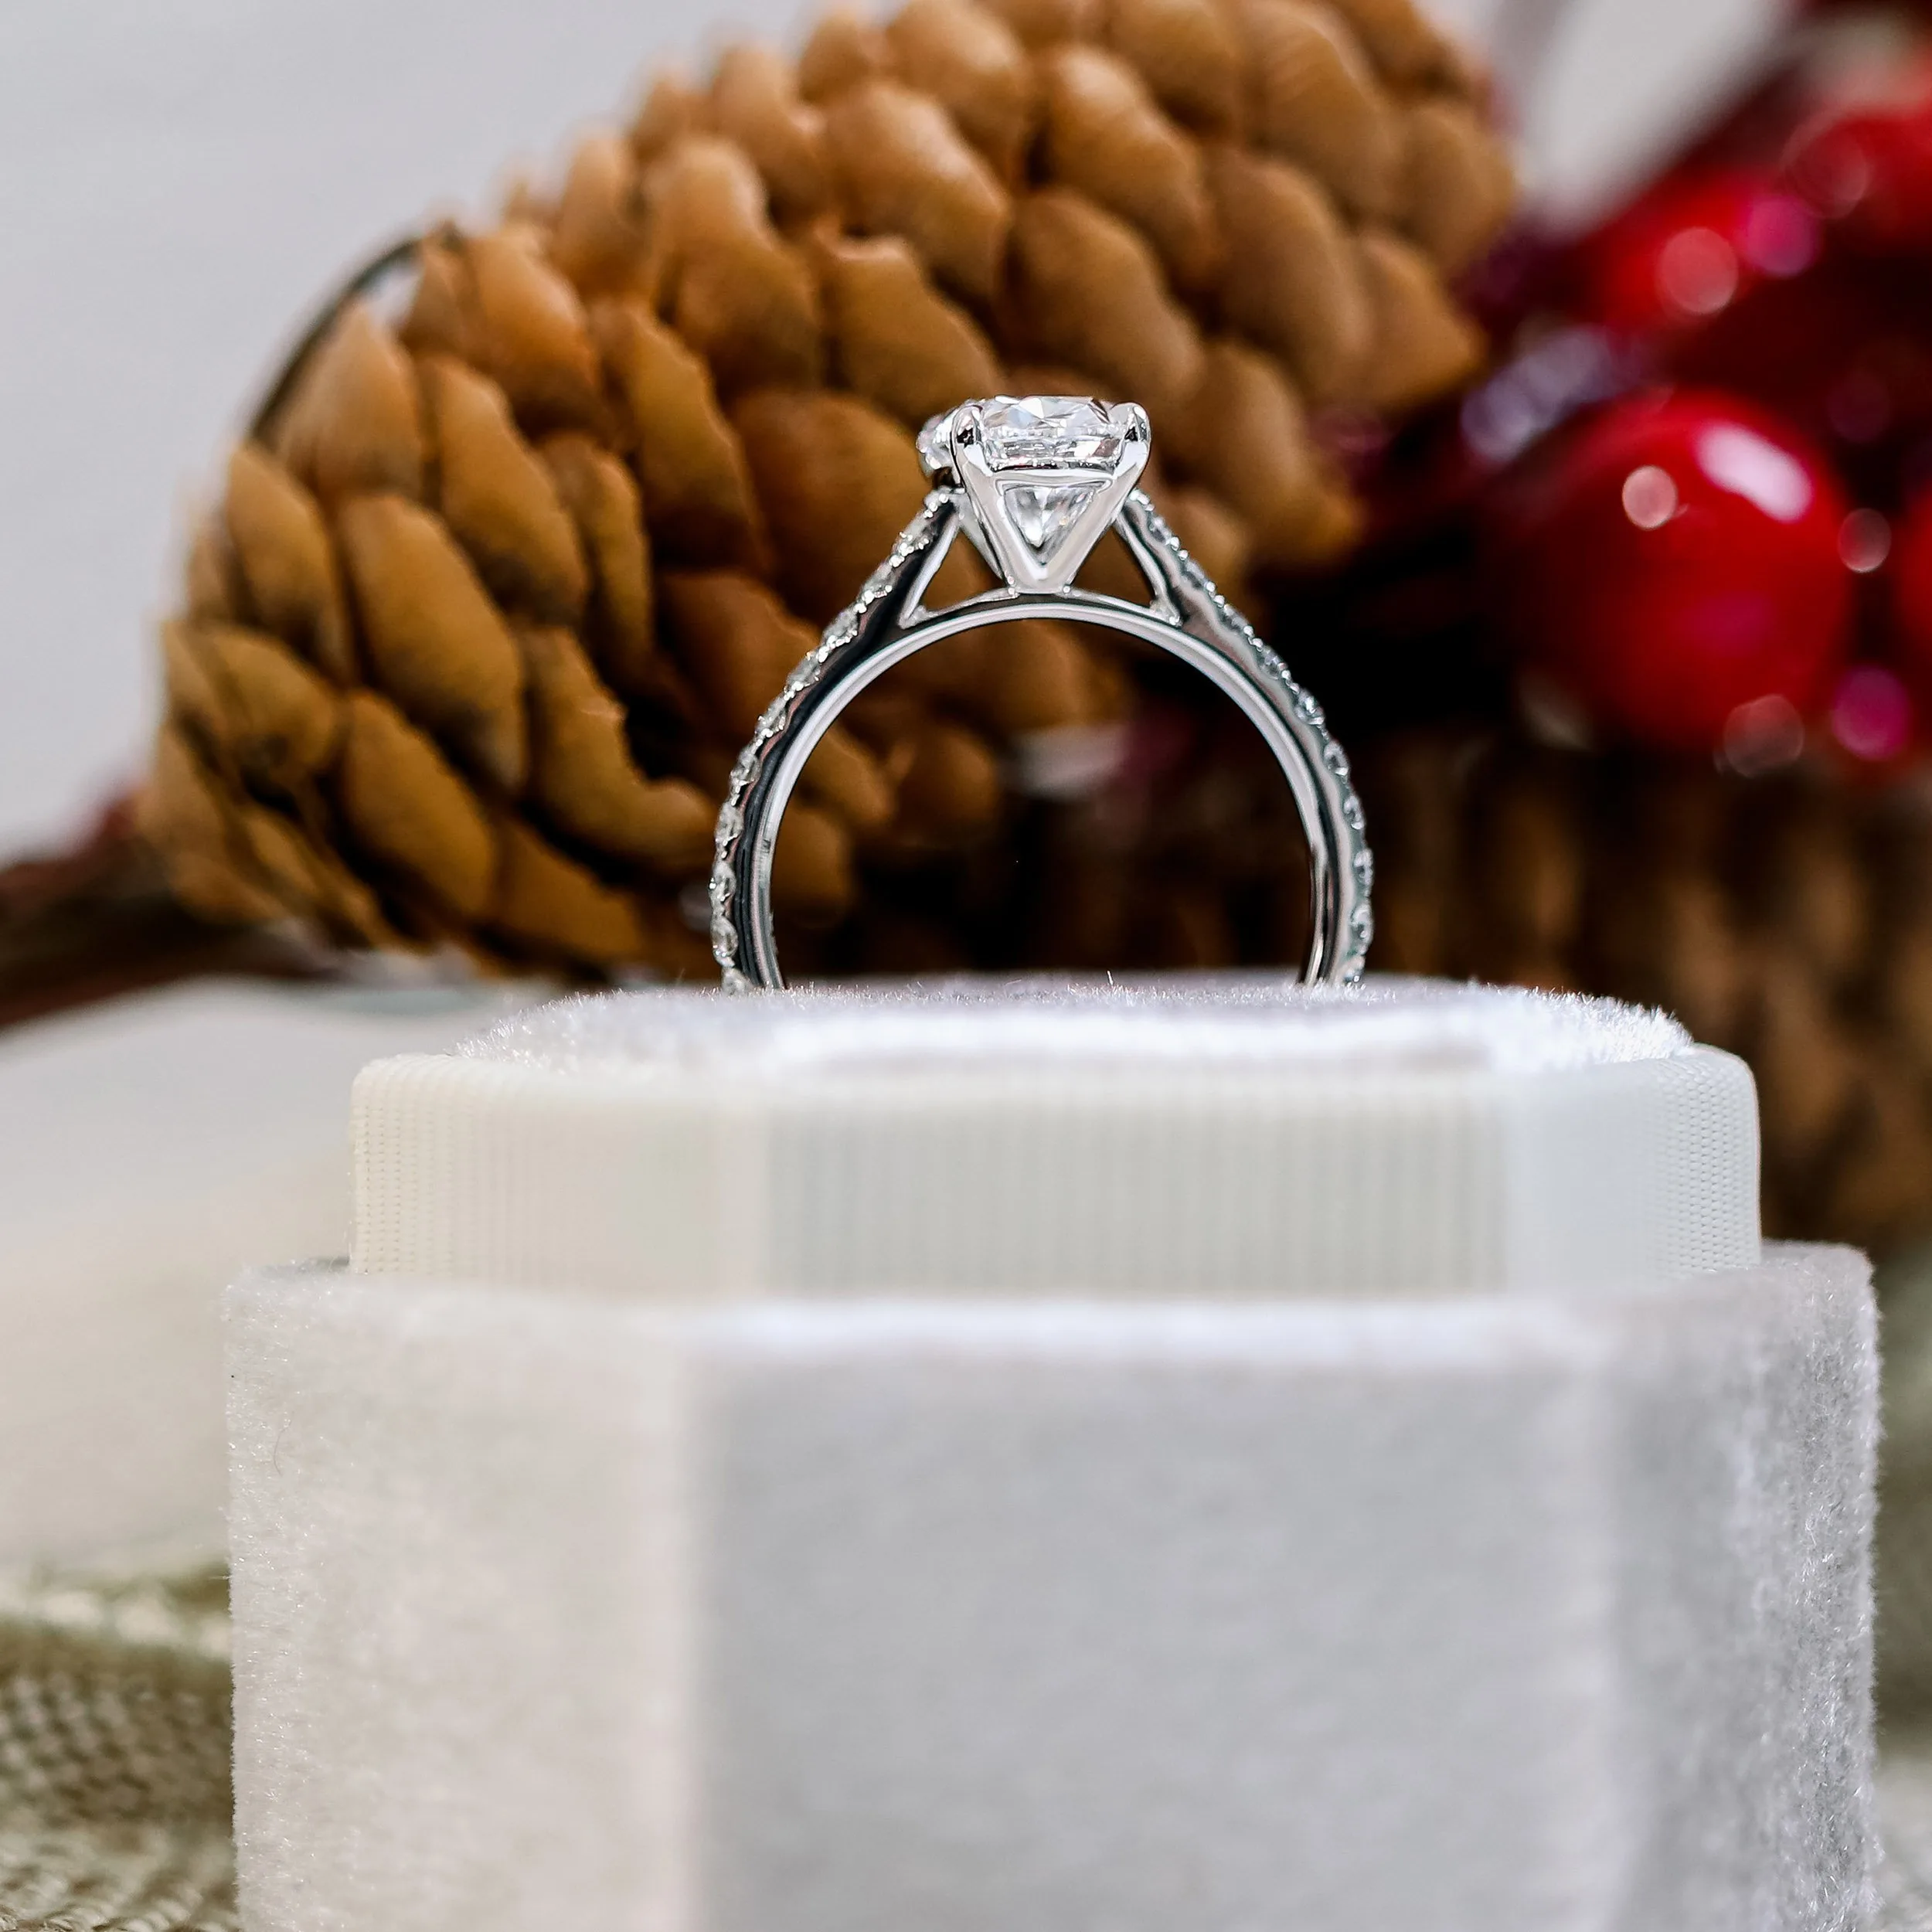 cathedral-pave-lab-diamond-ring_1641507330732-24BGKY749TOLTJKLBTCG